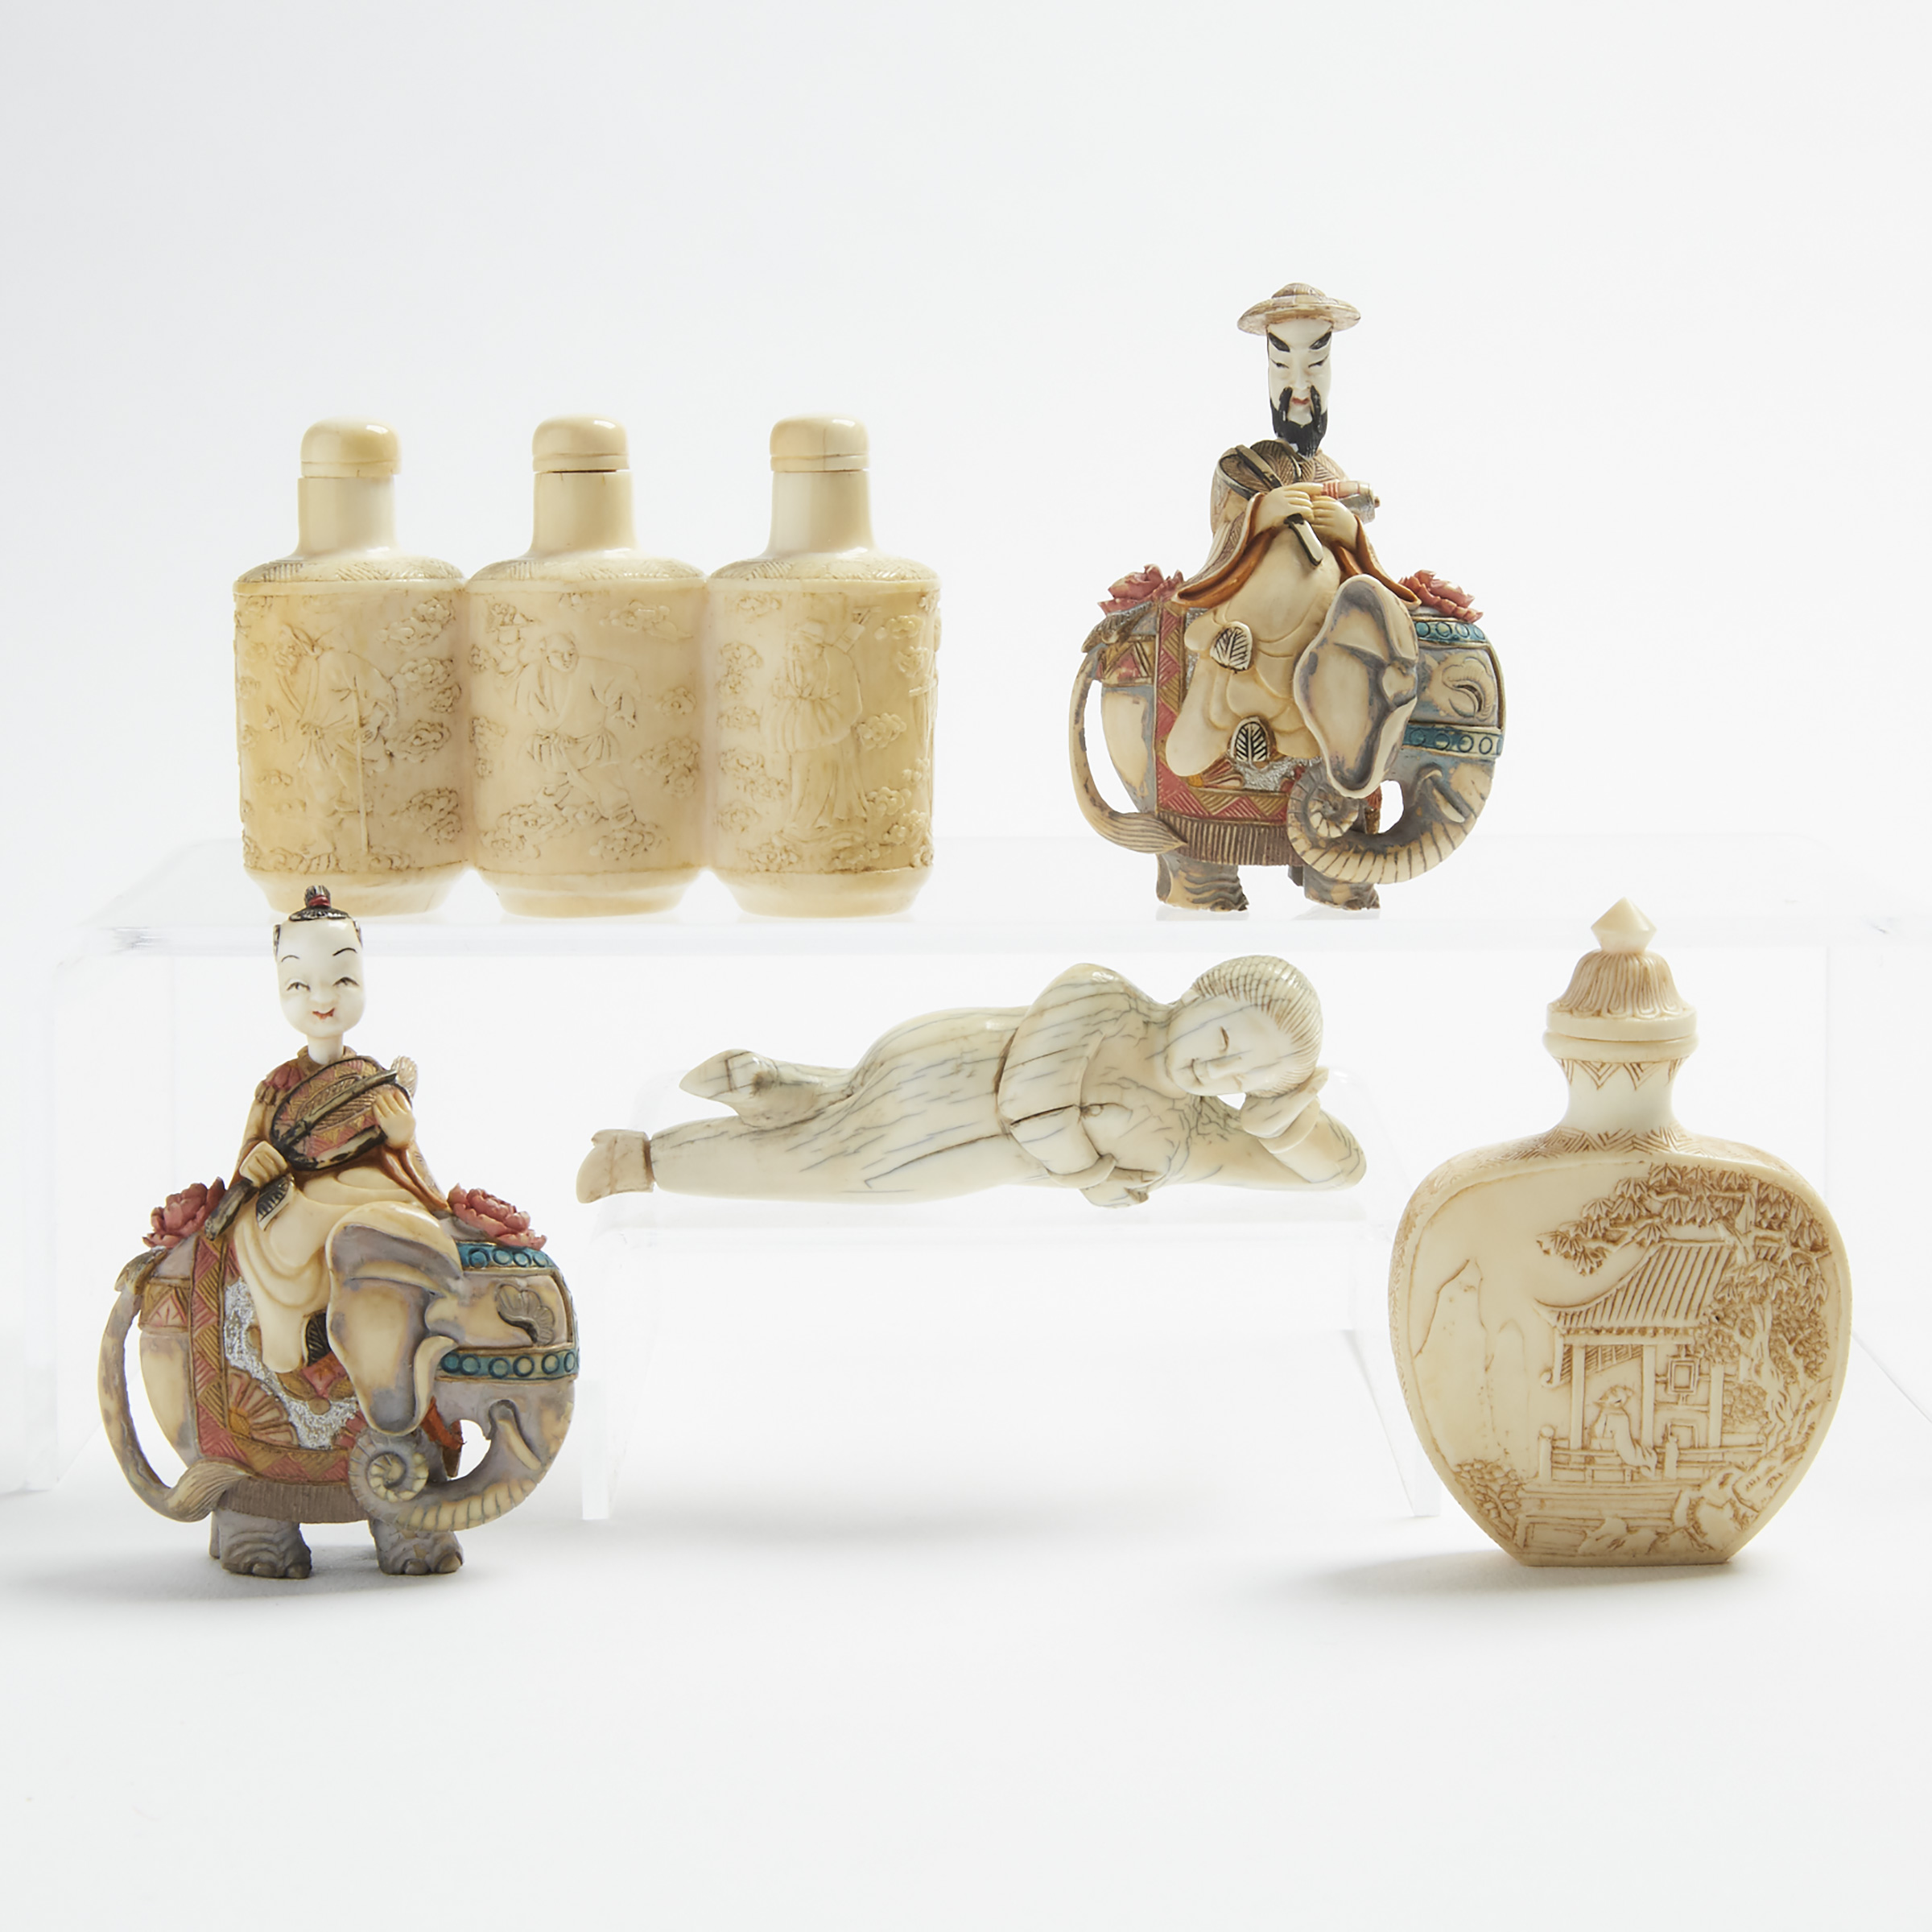 A Group of Five Ivory Snuff Bottles, 19th/Early 20th Century